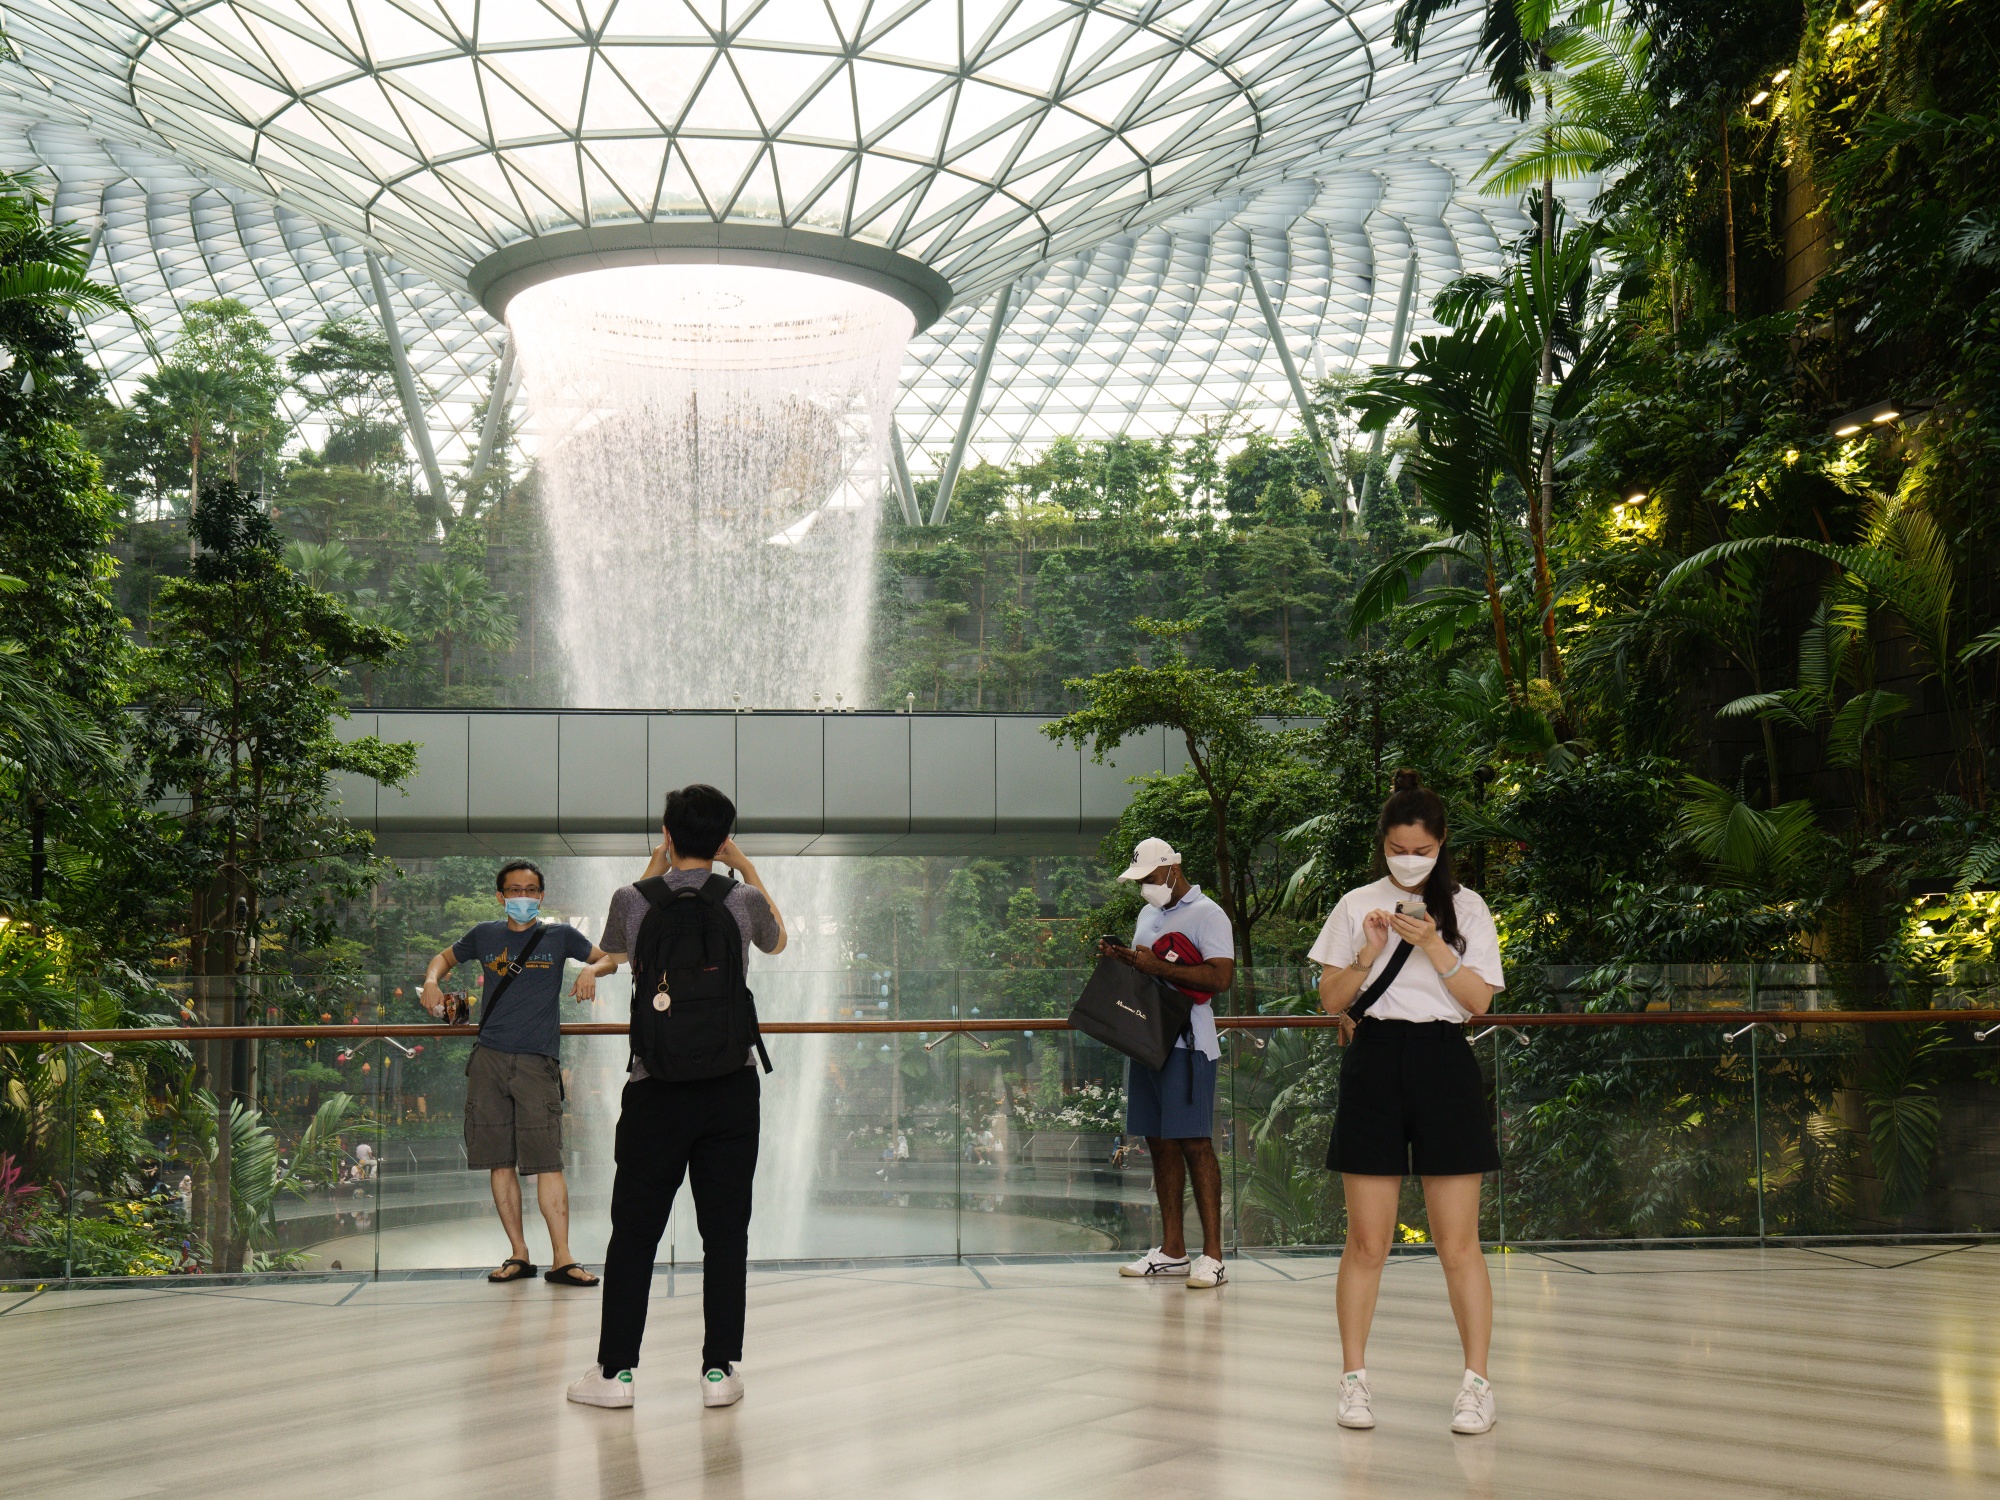 Singapore's Changi Airport Unveils New State-of-the-Art Terminal